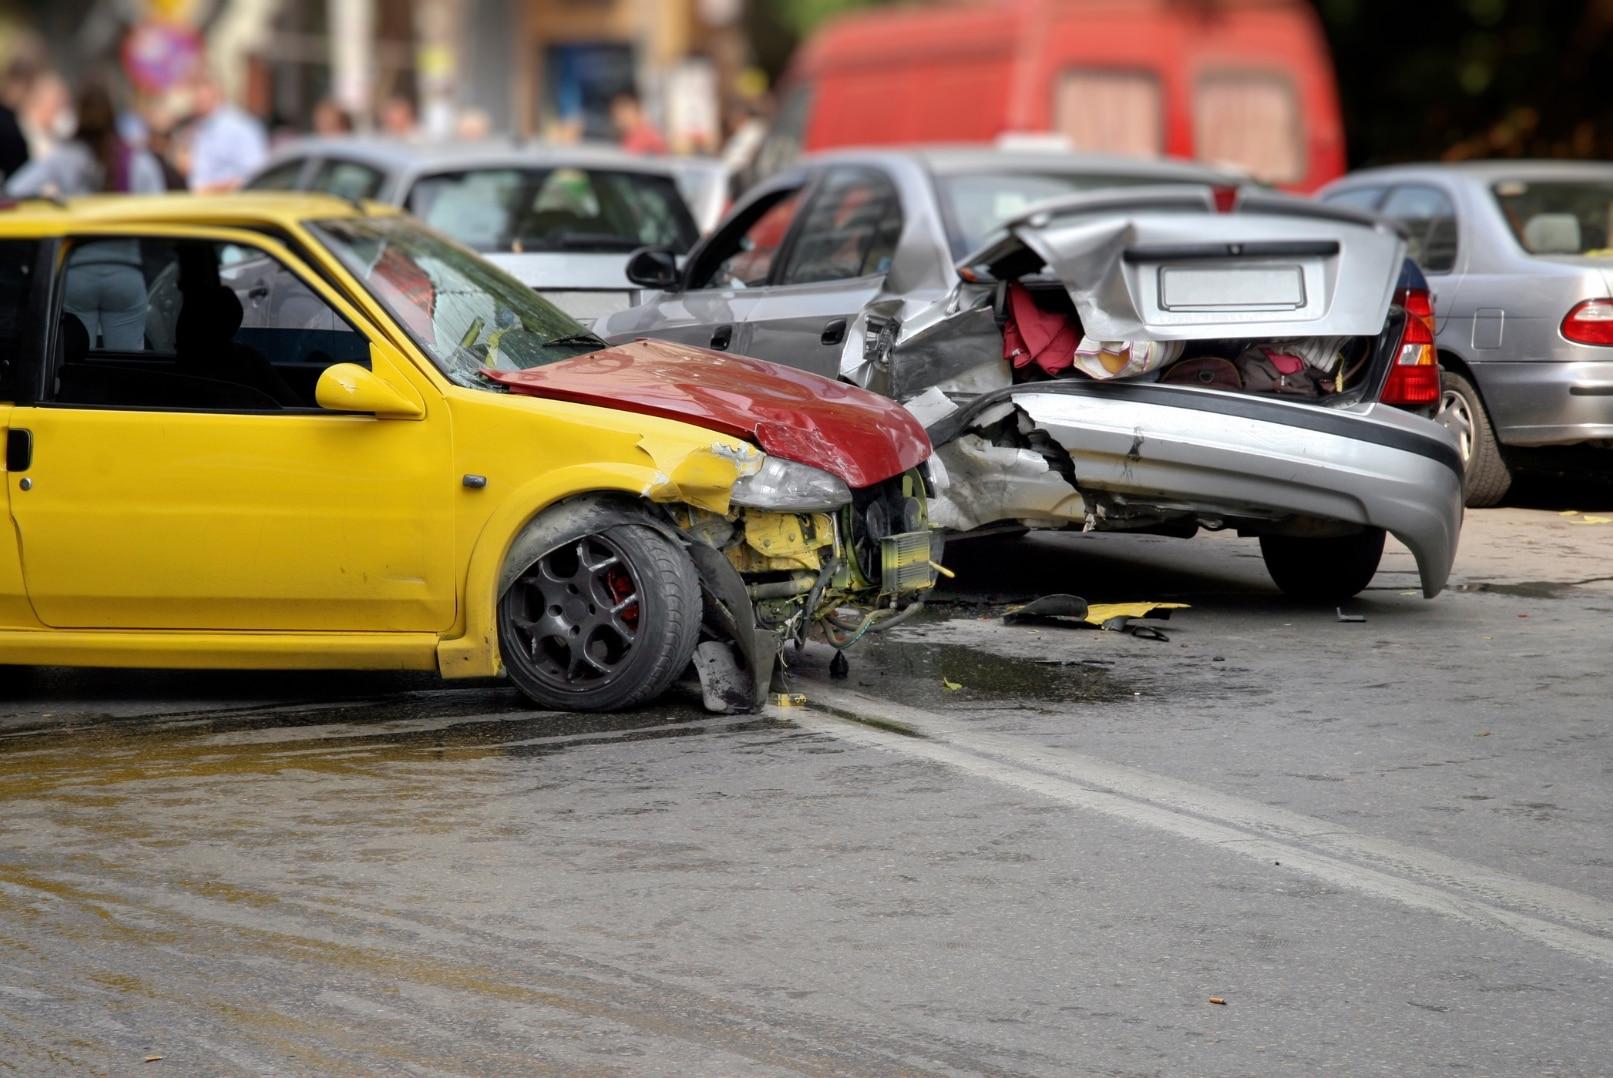 Finding An East-Point Car Accident Lawyer